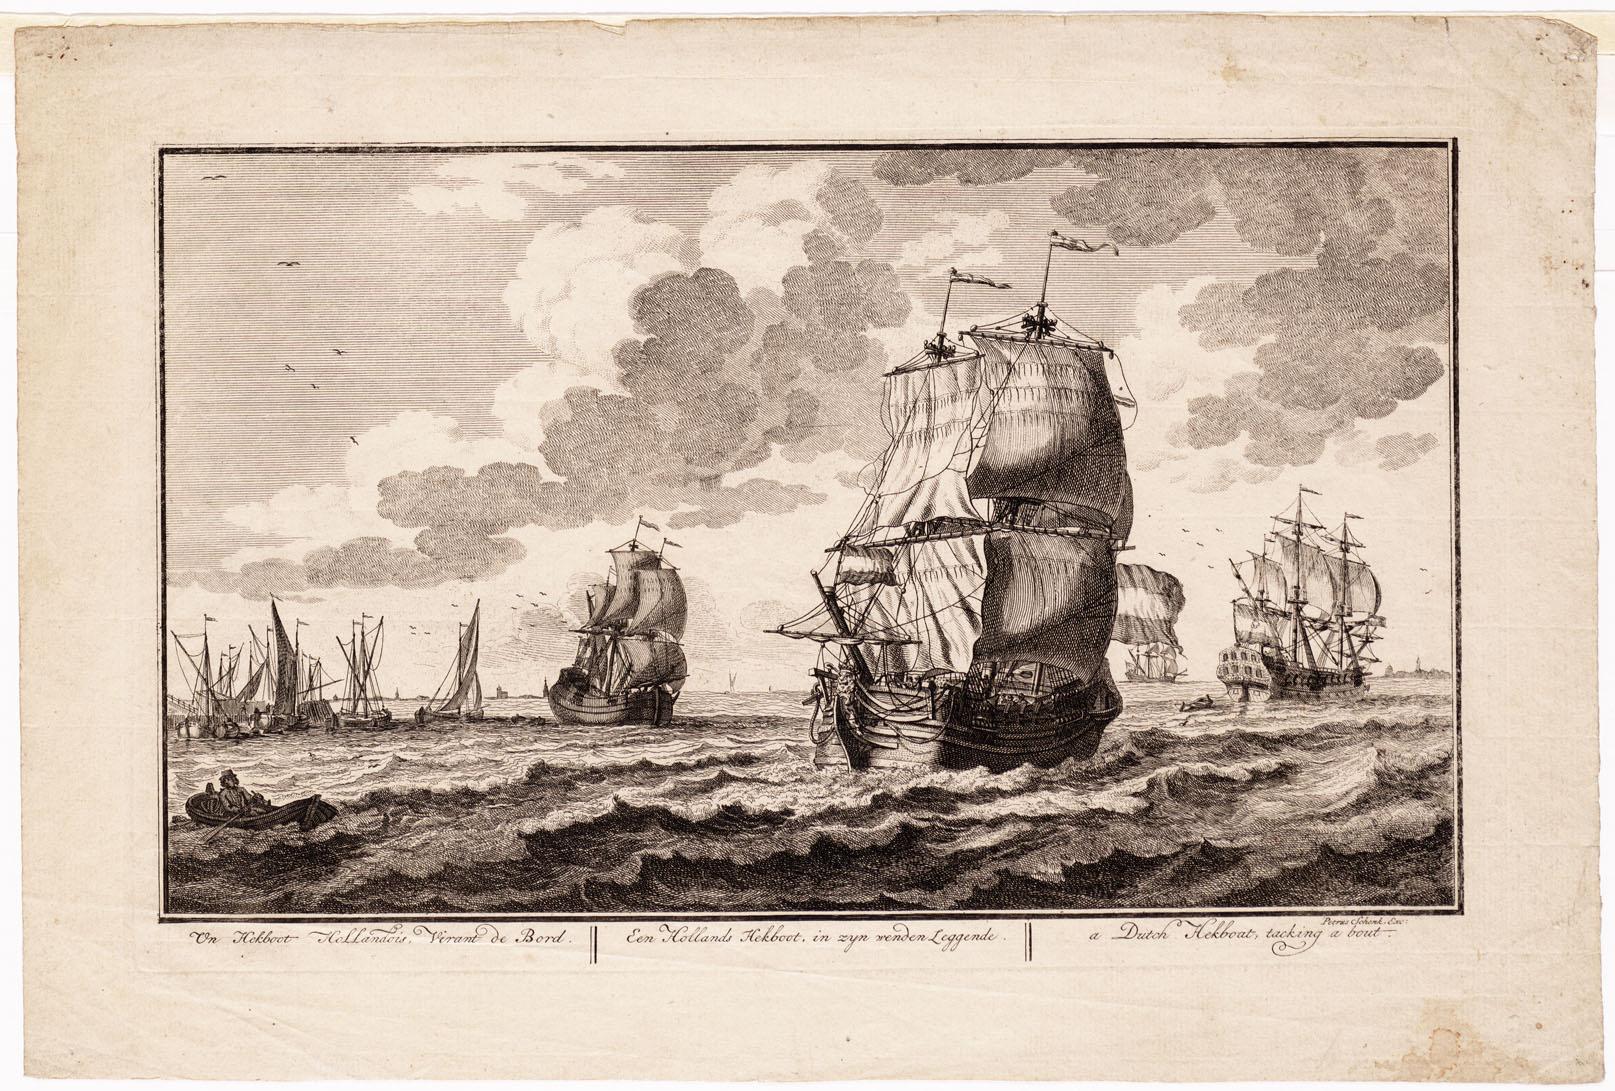 A drawing of a ship similar to the Rooswijk – a Dutch ‘hekboot’, by Adolf van der Laan in 1716.